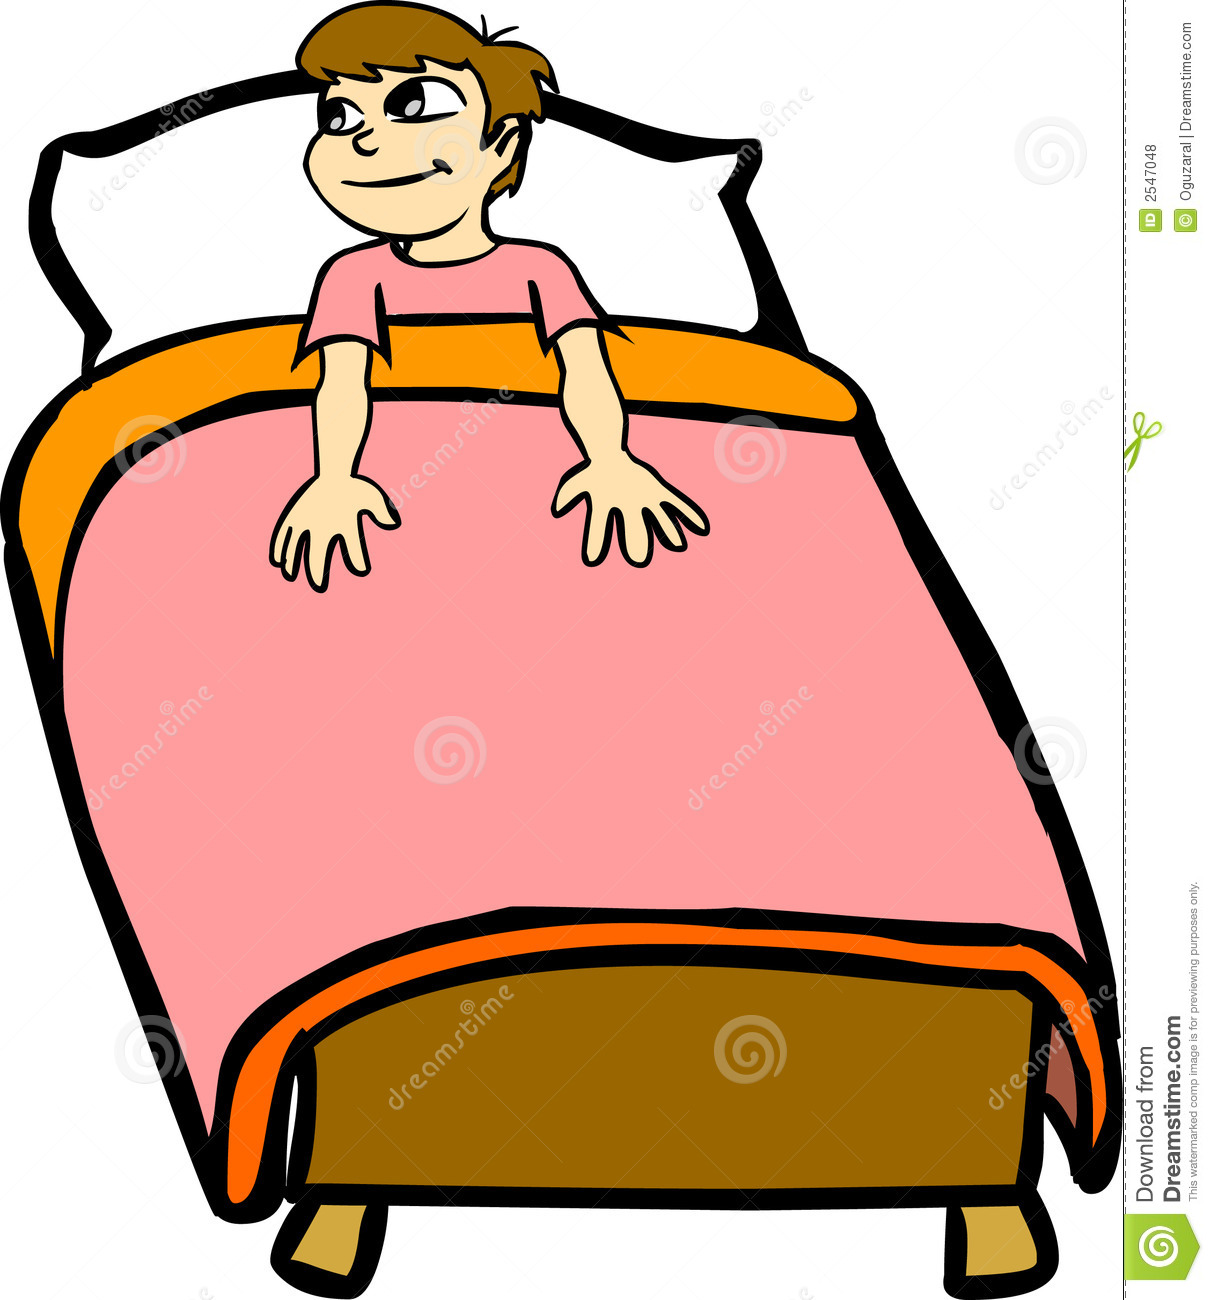 There Is 40 Make Your Bed   Free Cliparts All Used For Free